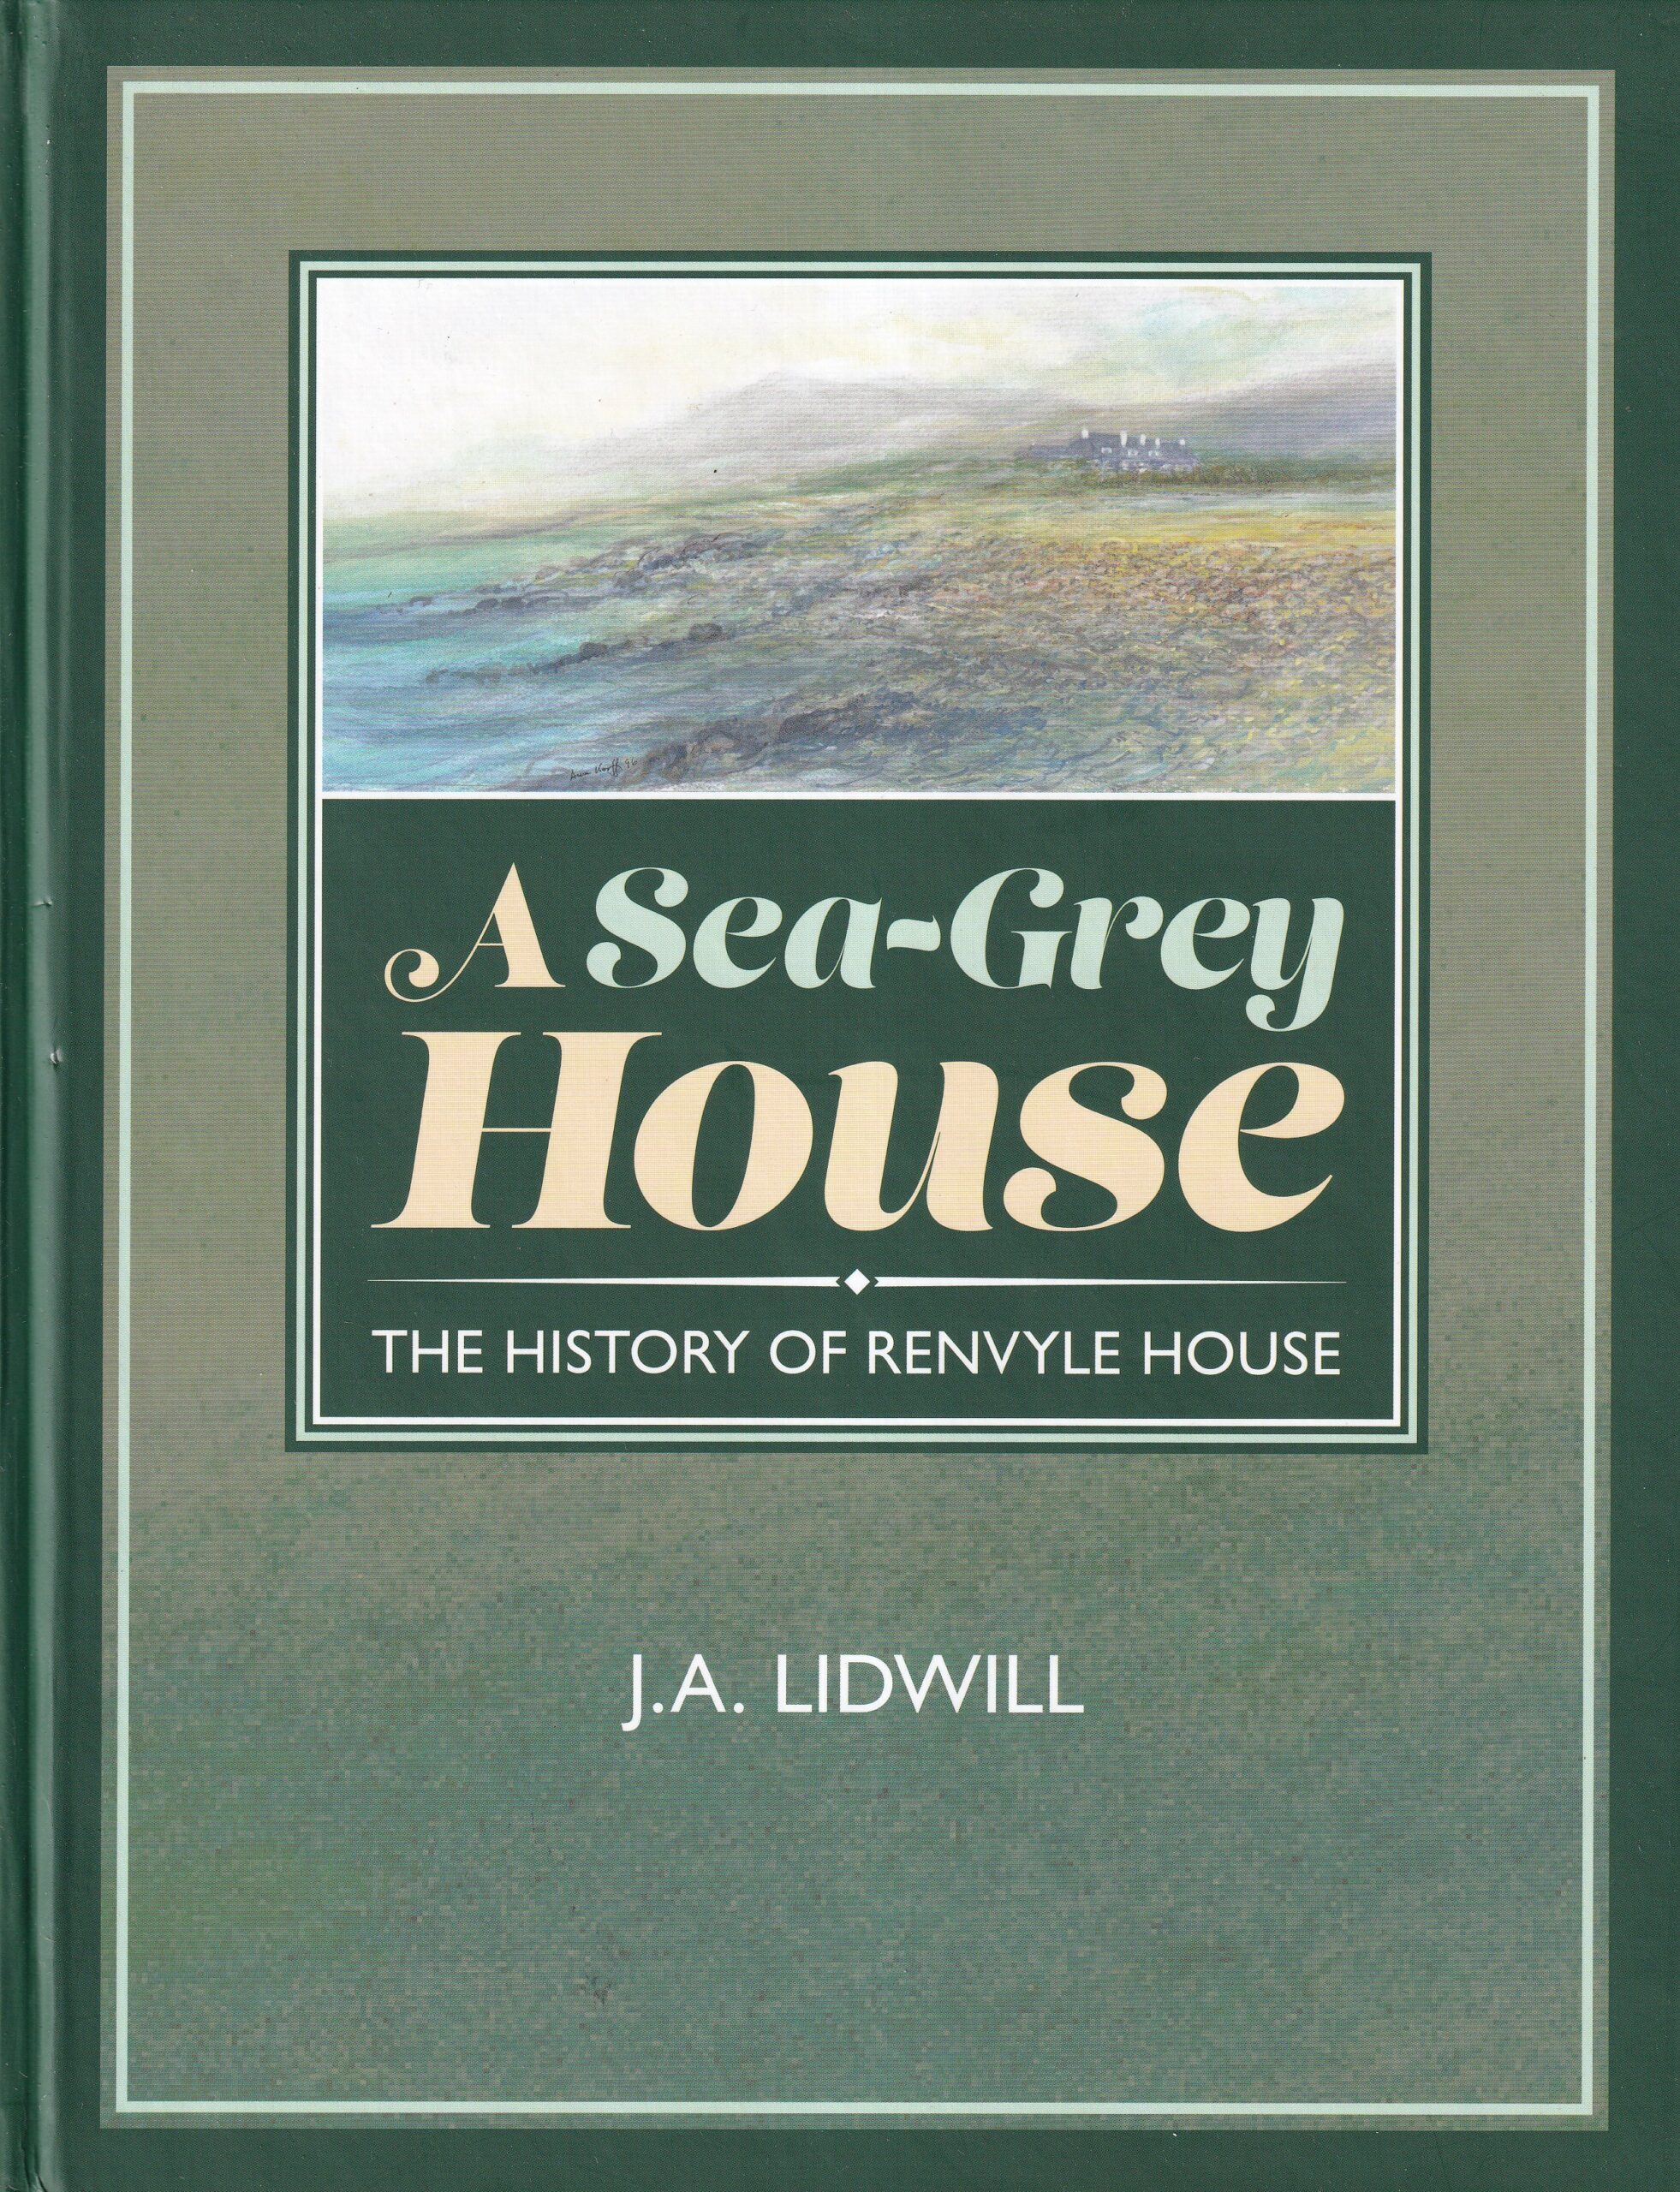 A Sea-Grey House: The History of Renvyle House | J.A. Lidwill | Charlie Byrne's